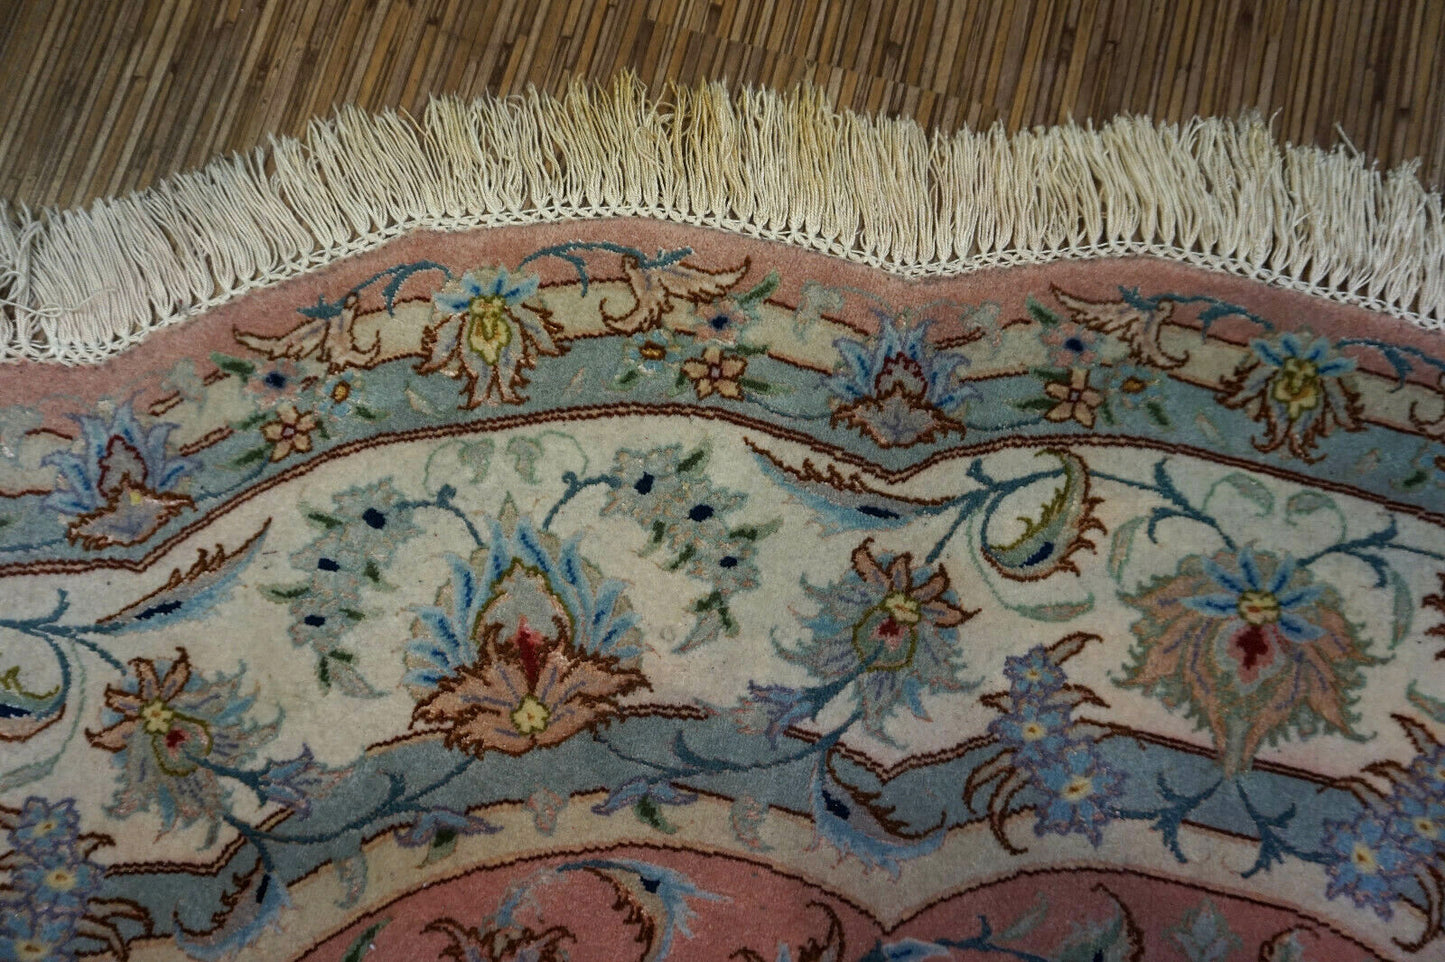 Beige, Pink, and Turquoise Details on Wool Rug